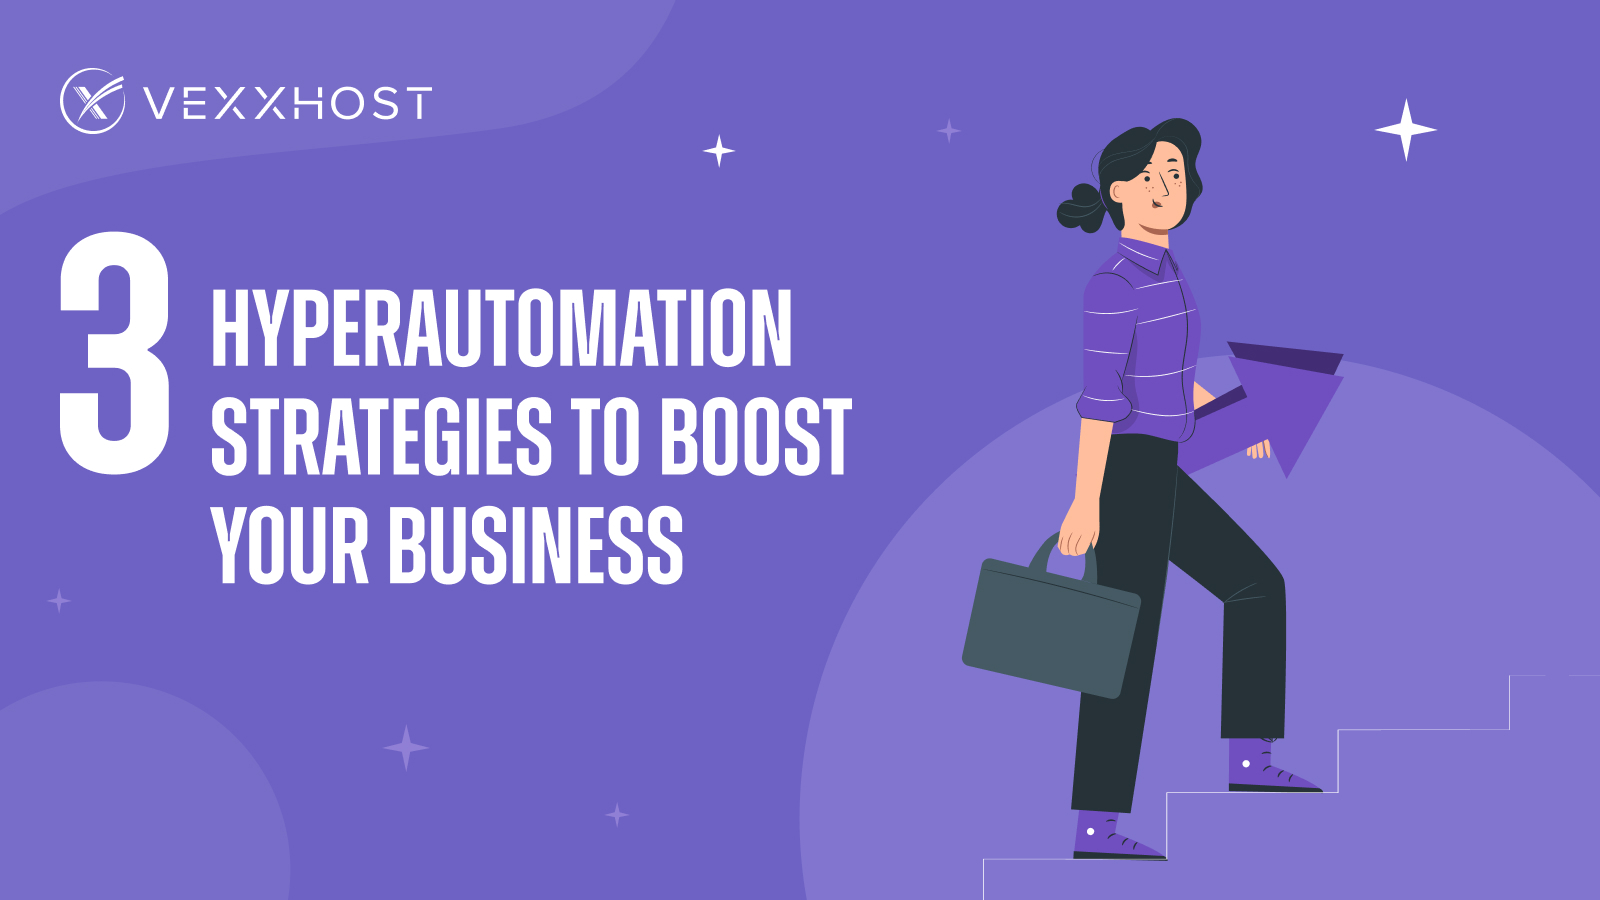 3 Hyperautomation Strategies to Boost Your Business 